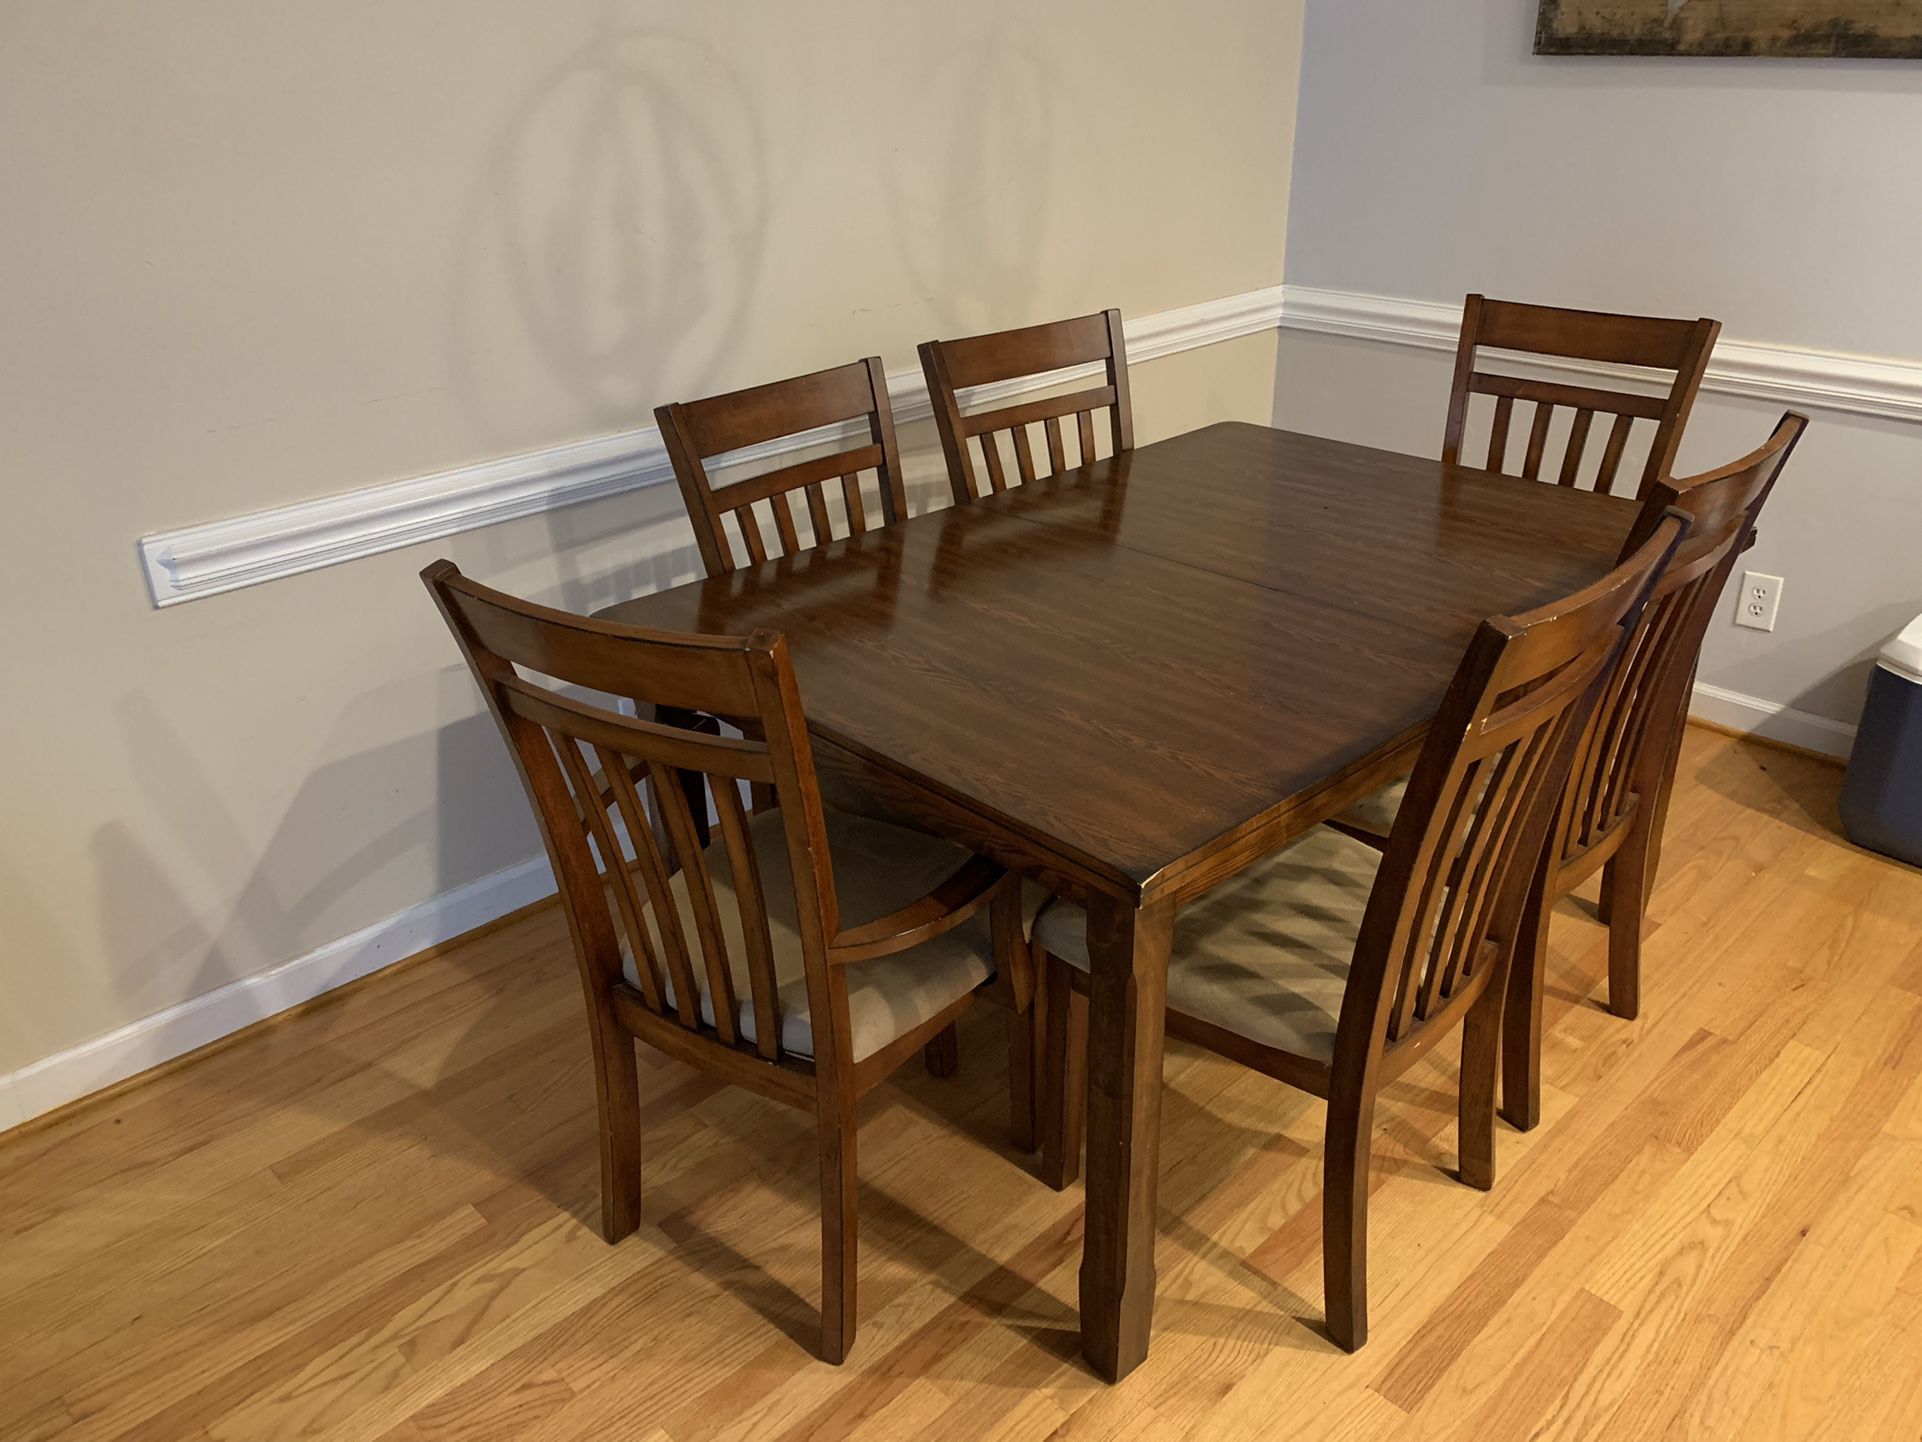 Dining Table, Solid Wood, 6 Chairs, With Leaf